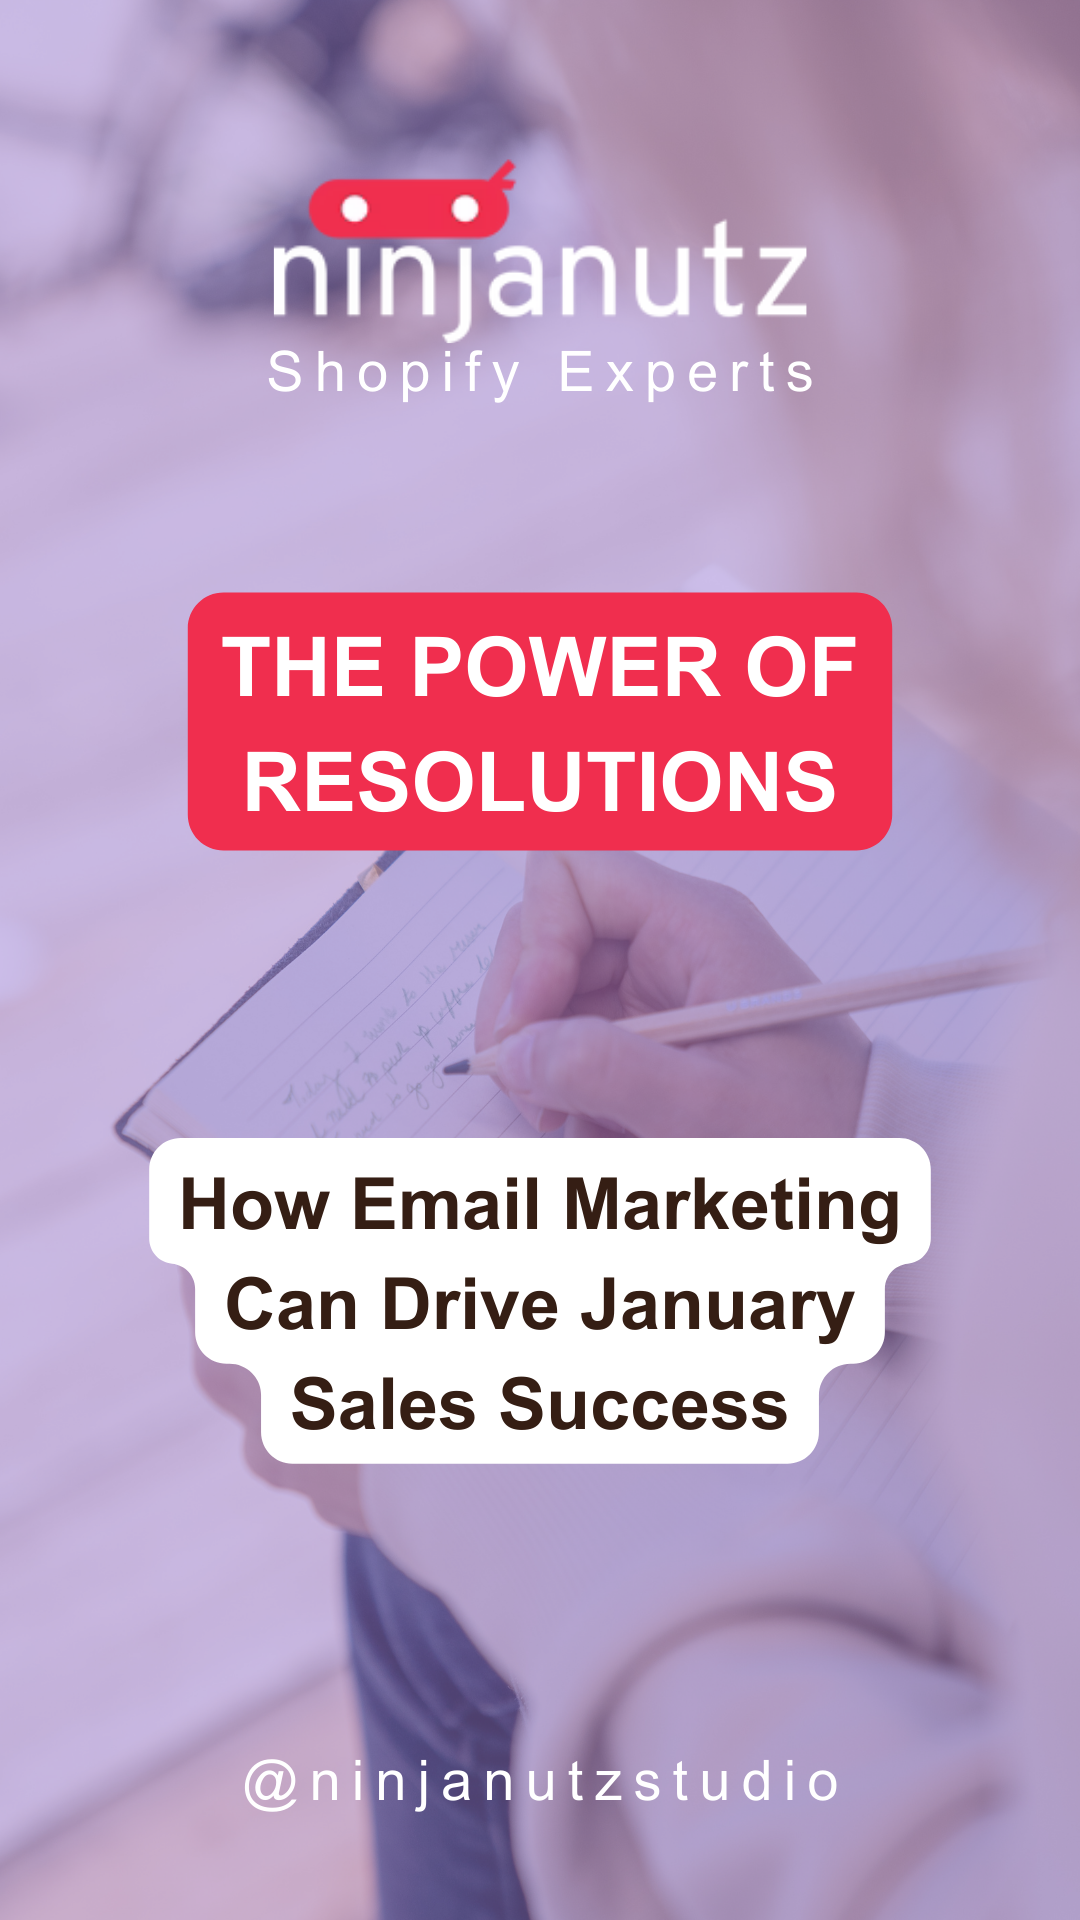 The-Power-of-Resolutions-How-Email-Marketing-Can-Drive-January-Sales-Success NinjaNutz®